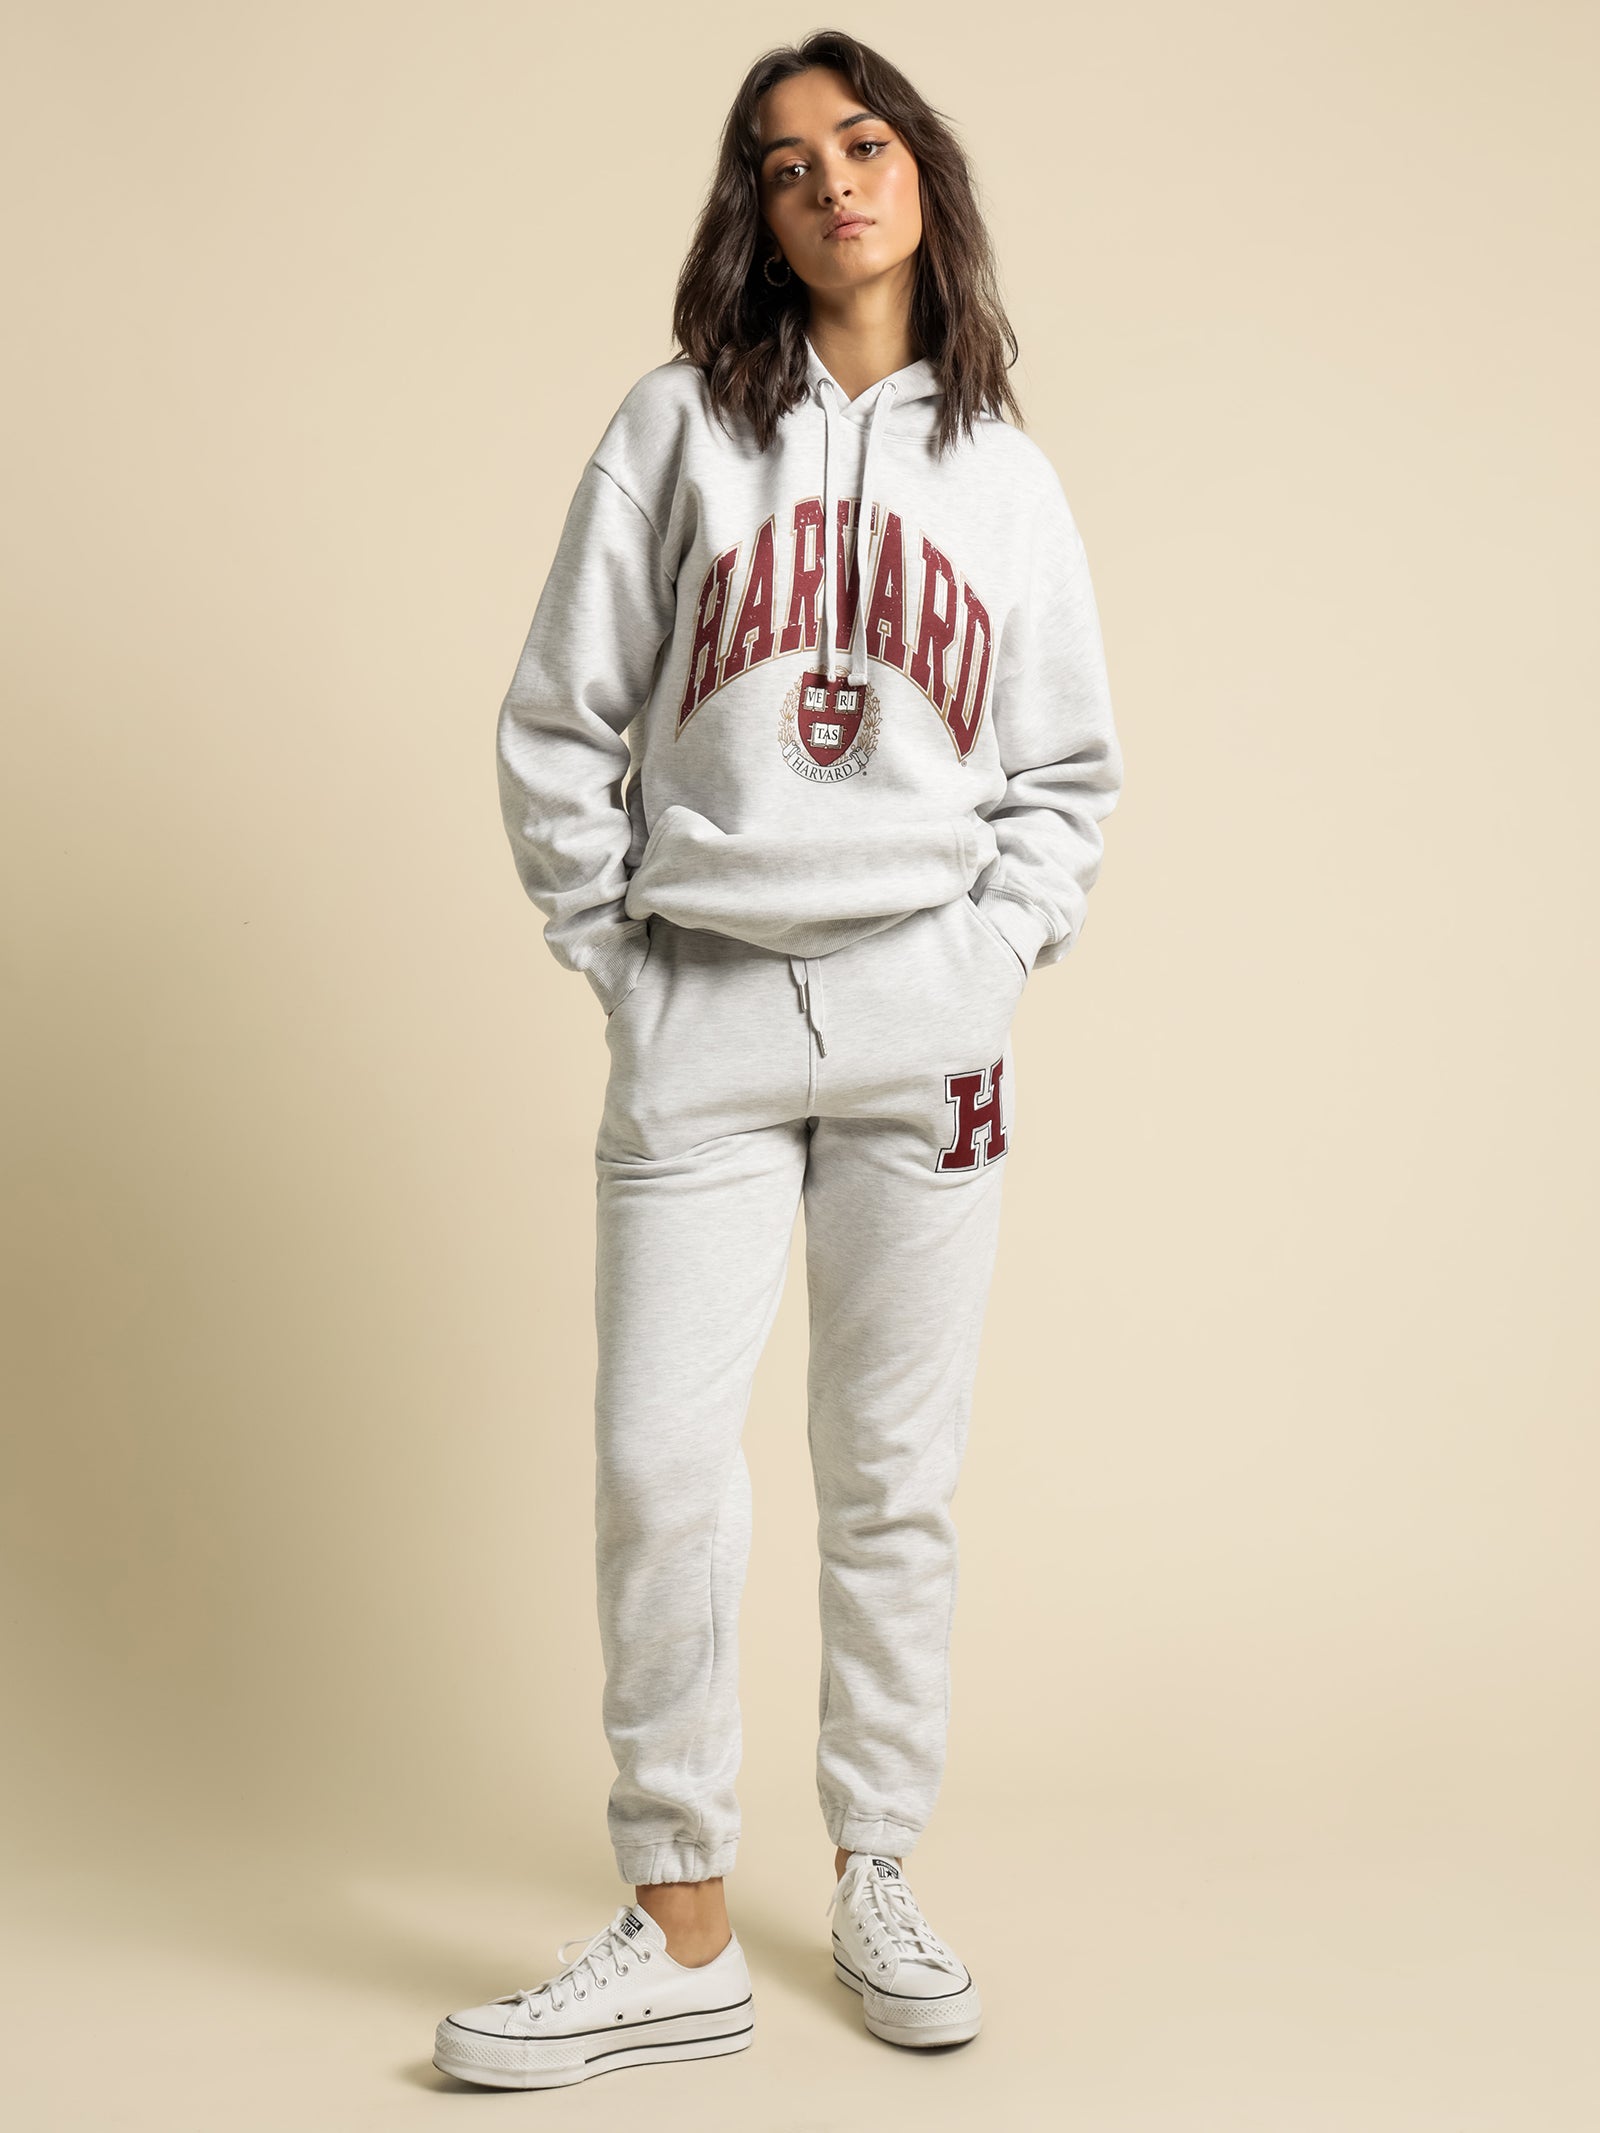 HARVARD Track Top and Pants (Vintage Collector's Item) | eBay